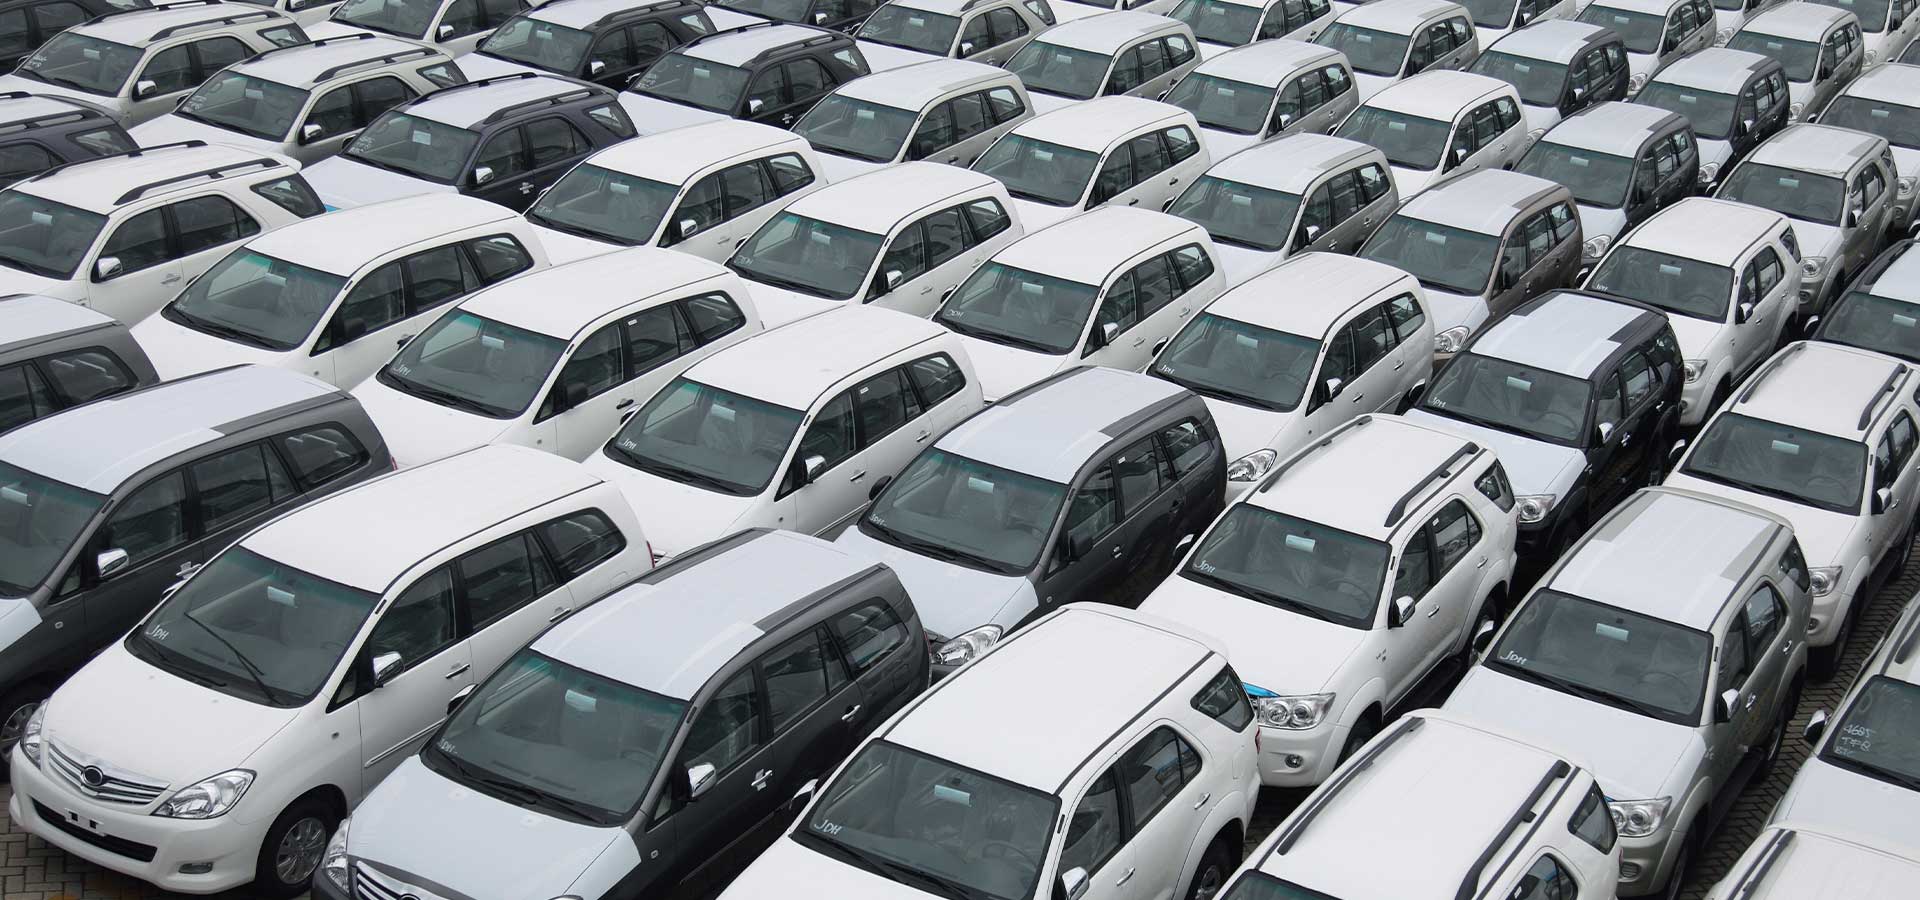 Lot full of white fleet vehicles RM auto leasing Is About Us and Your Fleet